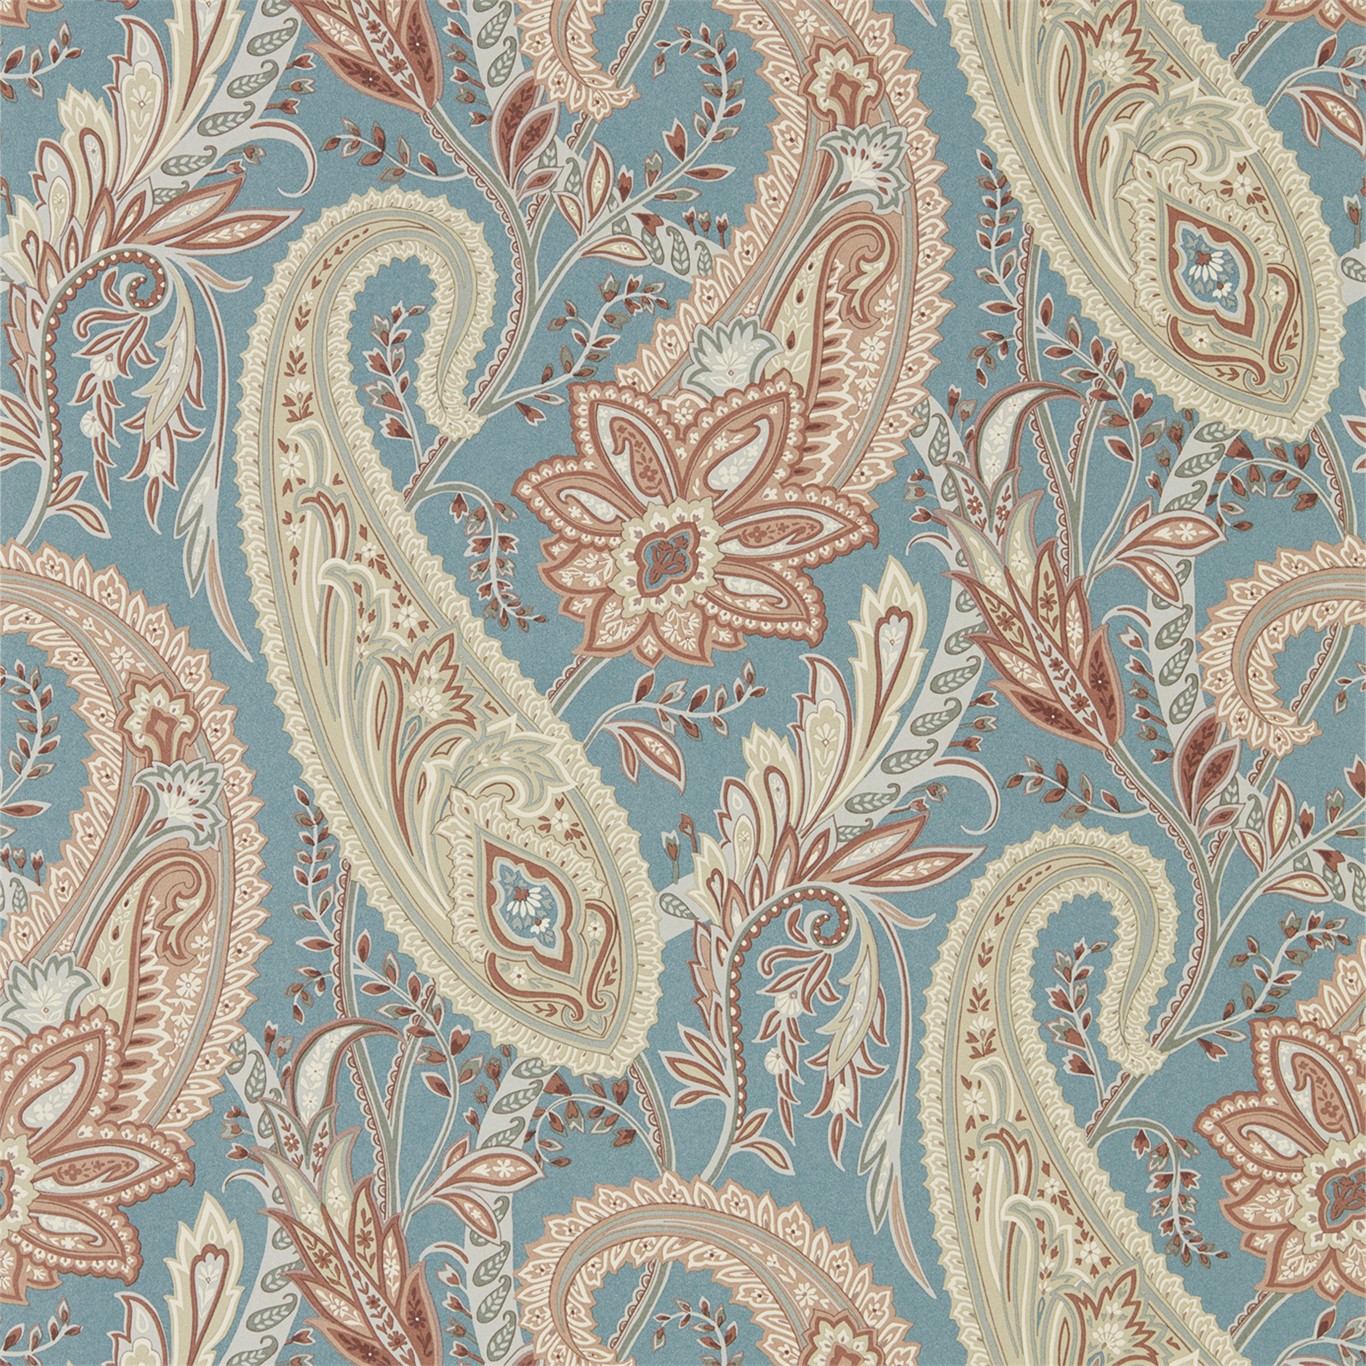 Cashmere Paisley Teal/Spice Wallpaper by SAN